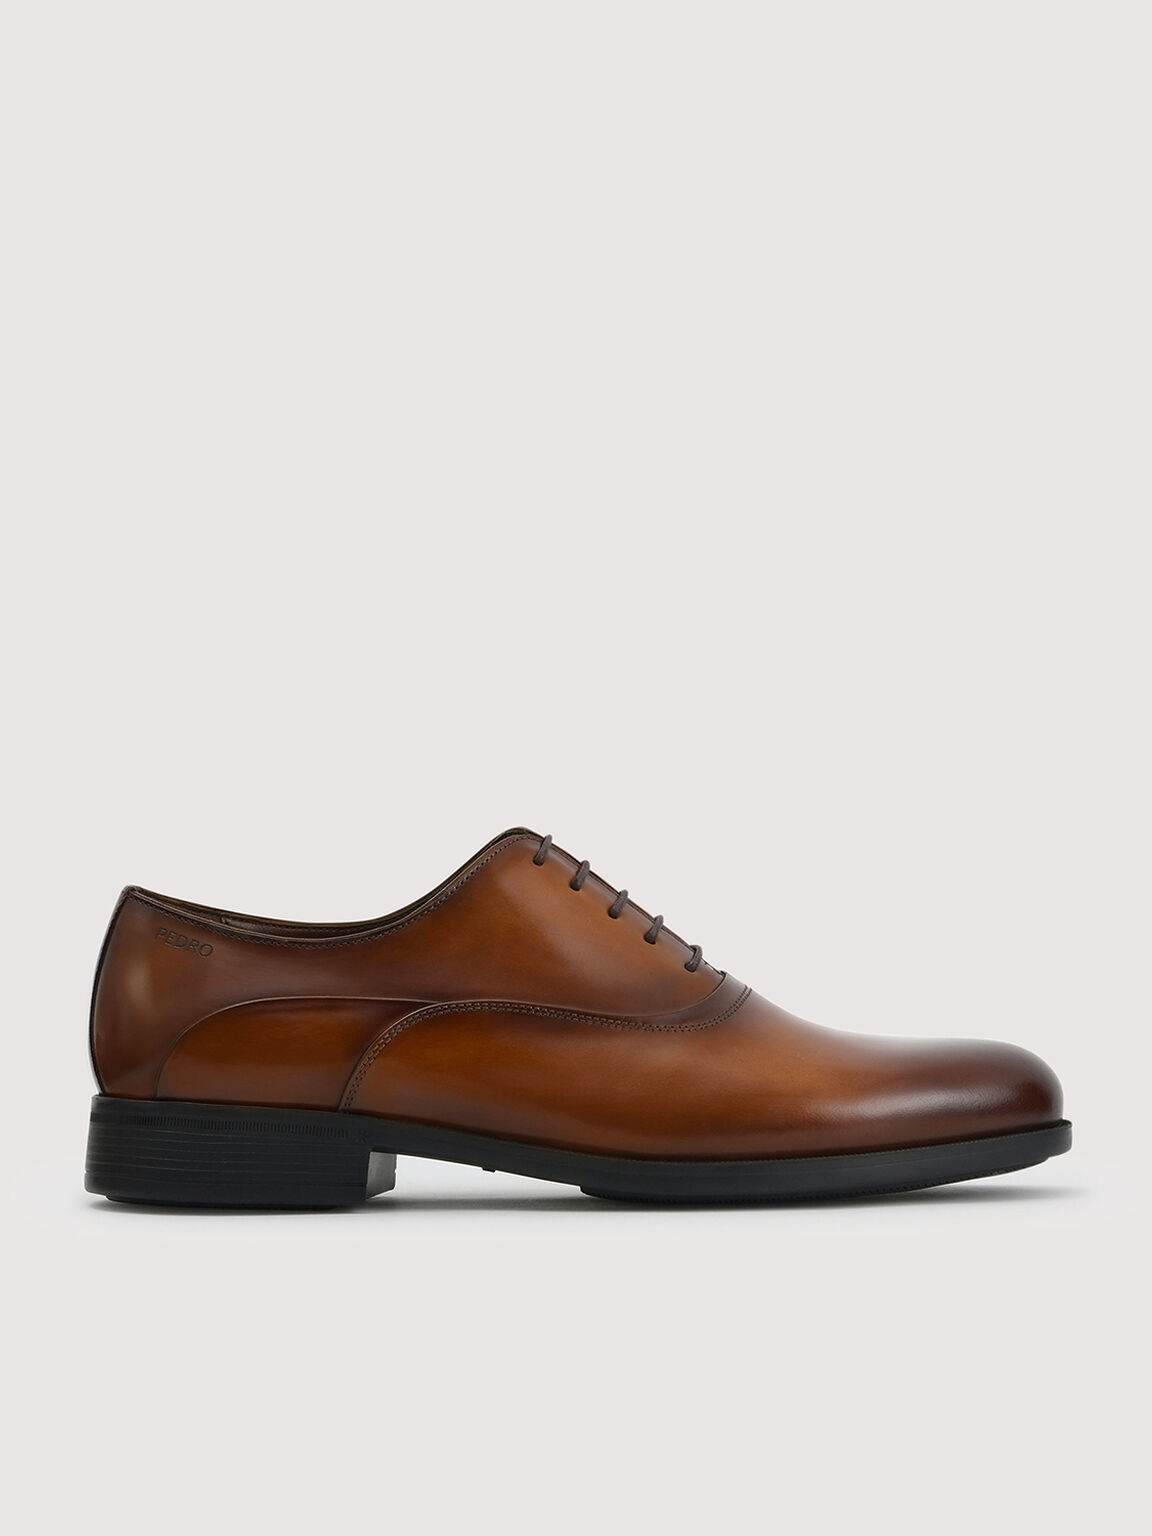 Altitude Lightweight Leather Oxford Shoes, Cognac